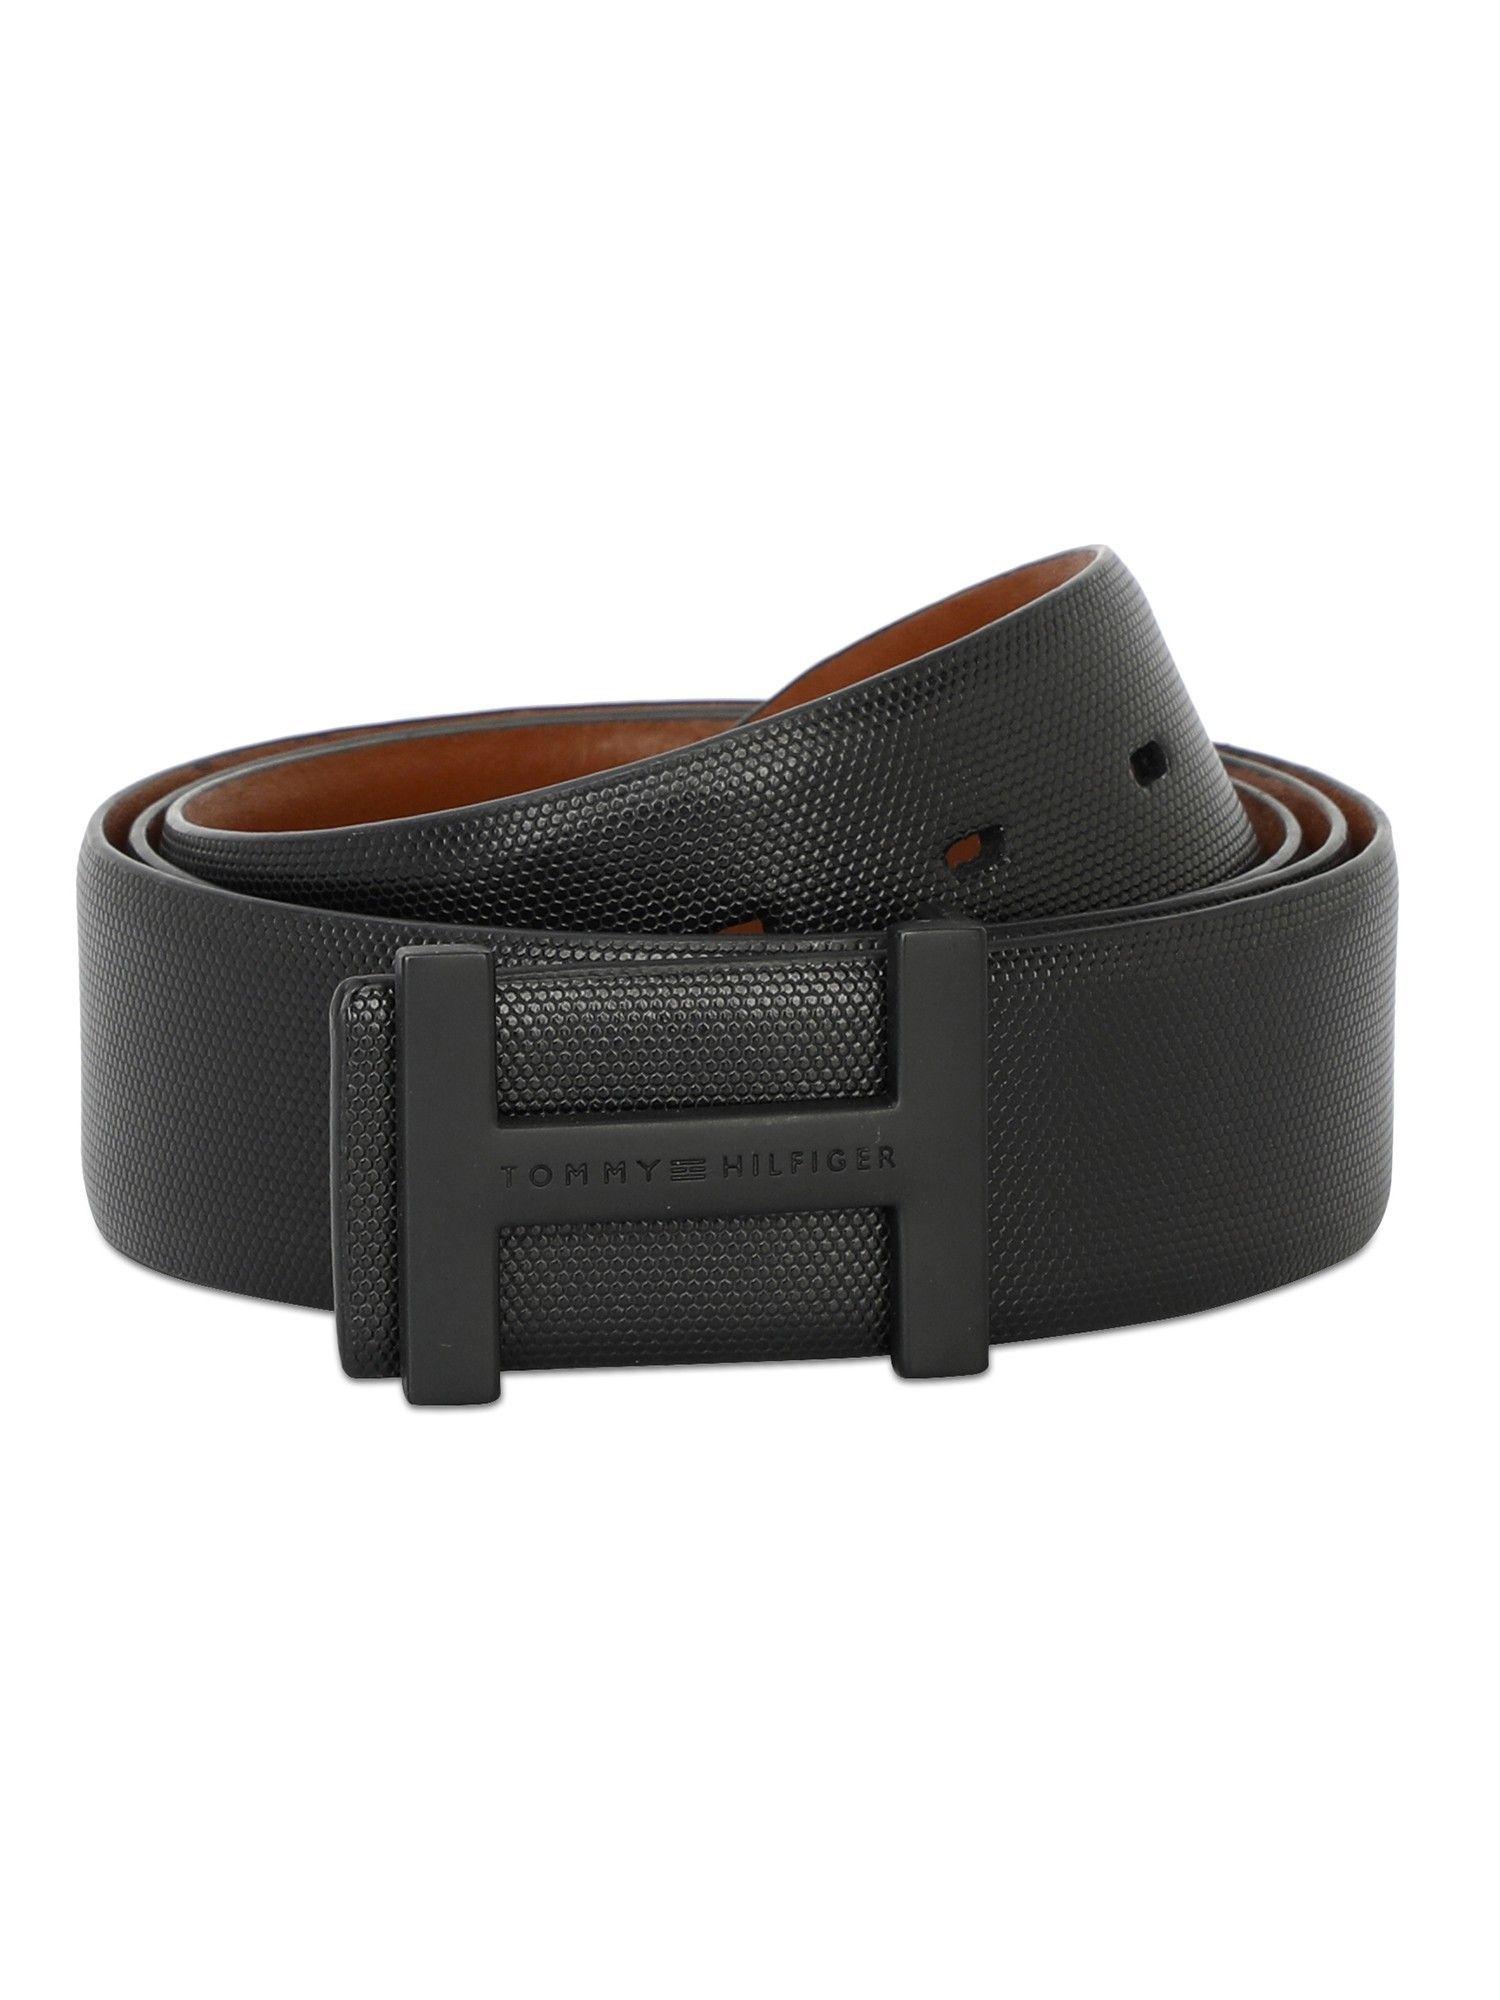 witherspoon mens leather reversible belt textured black & brown